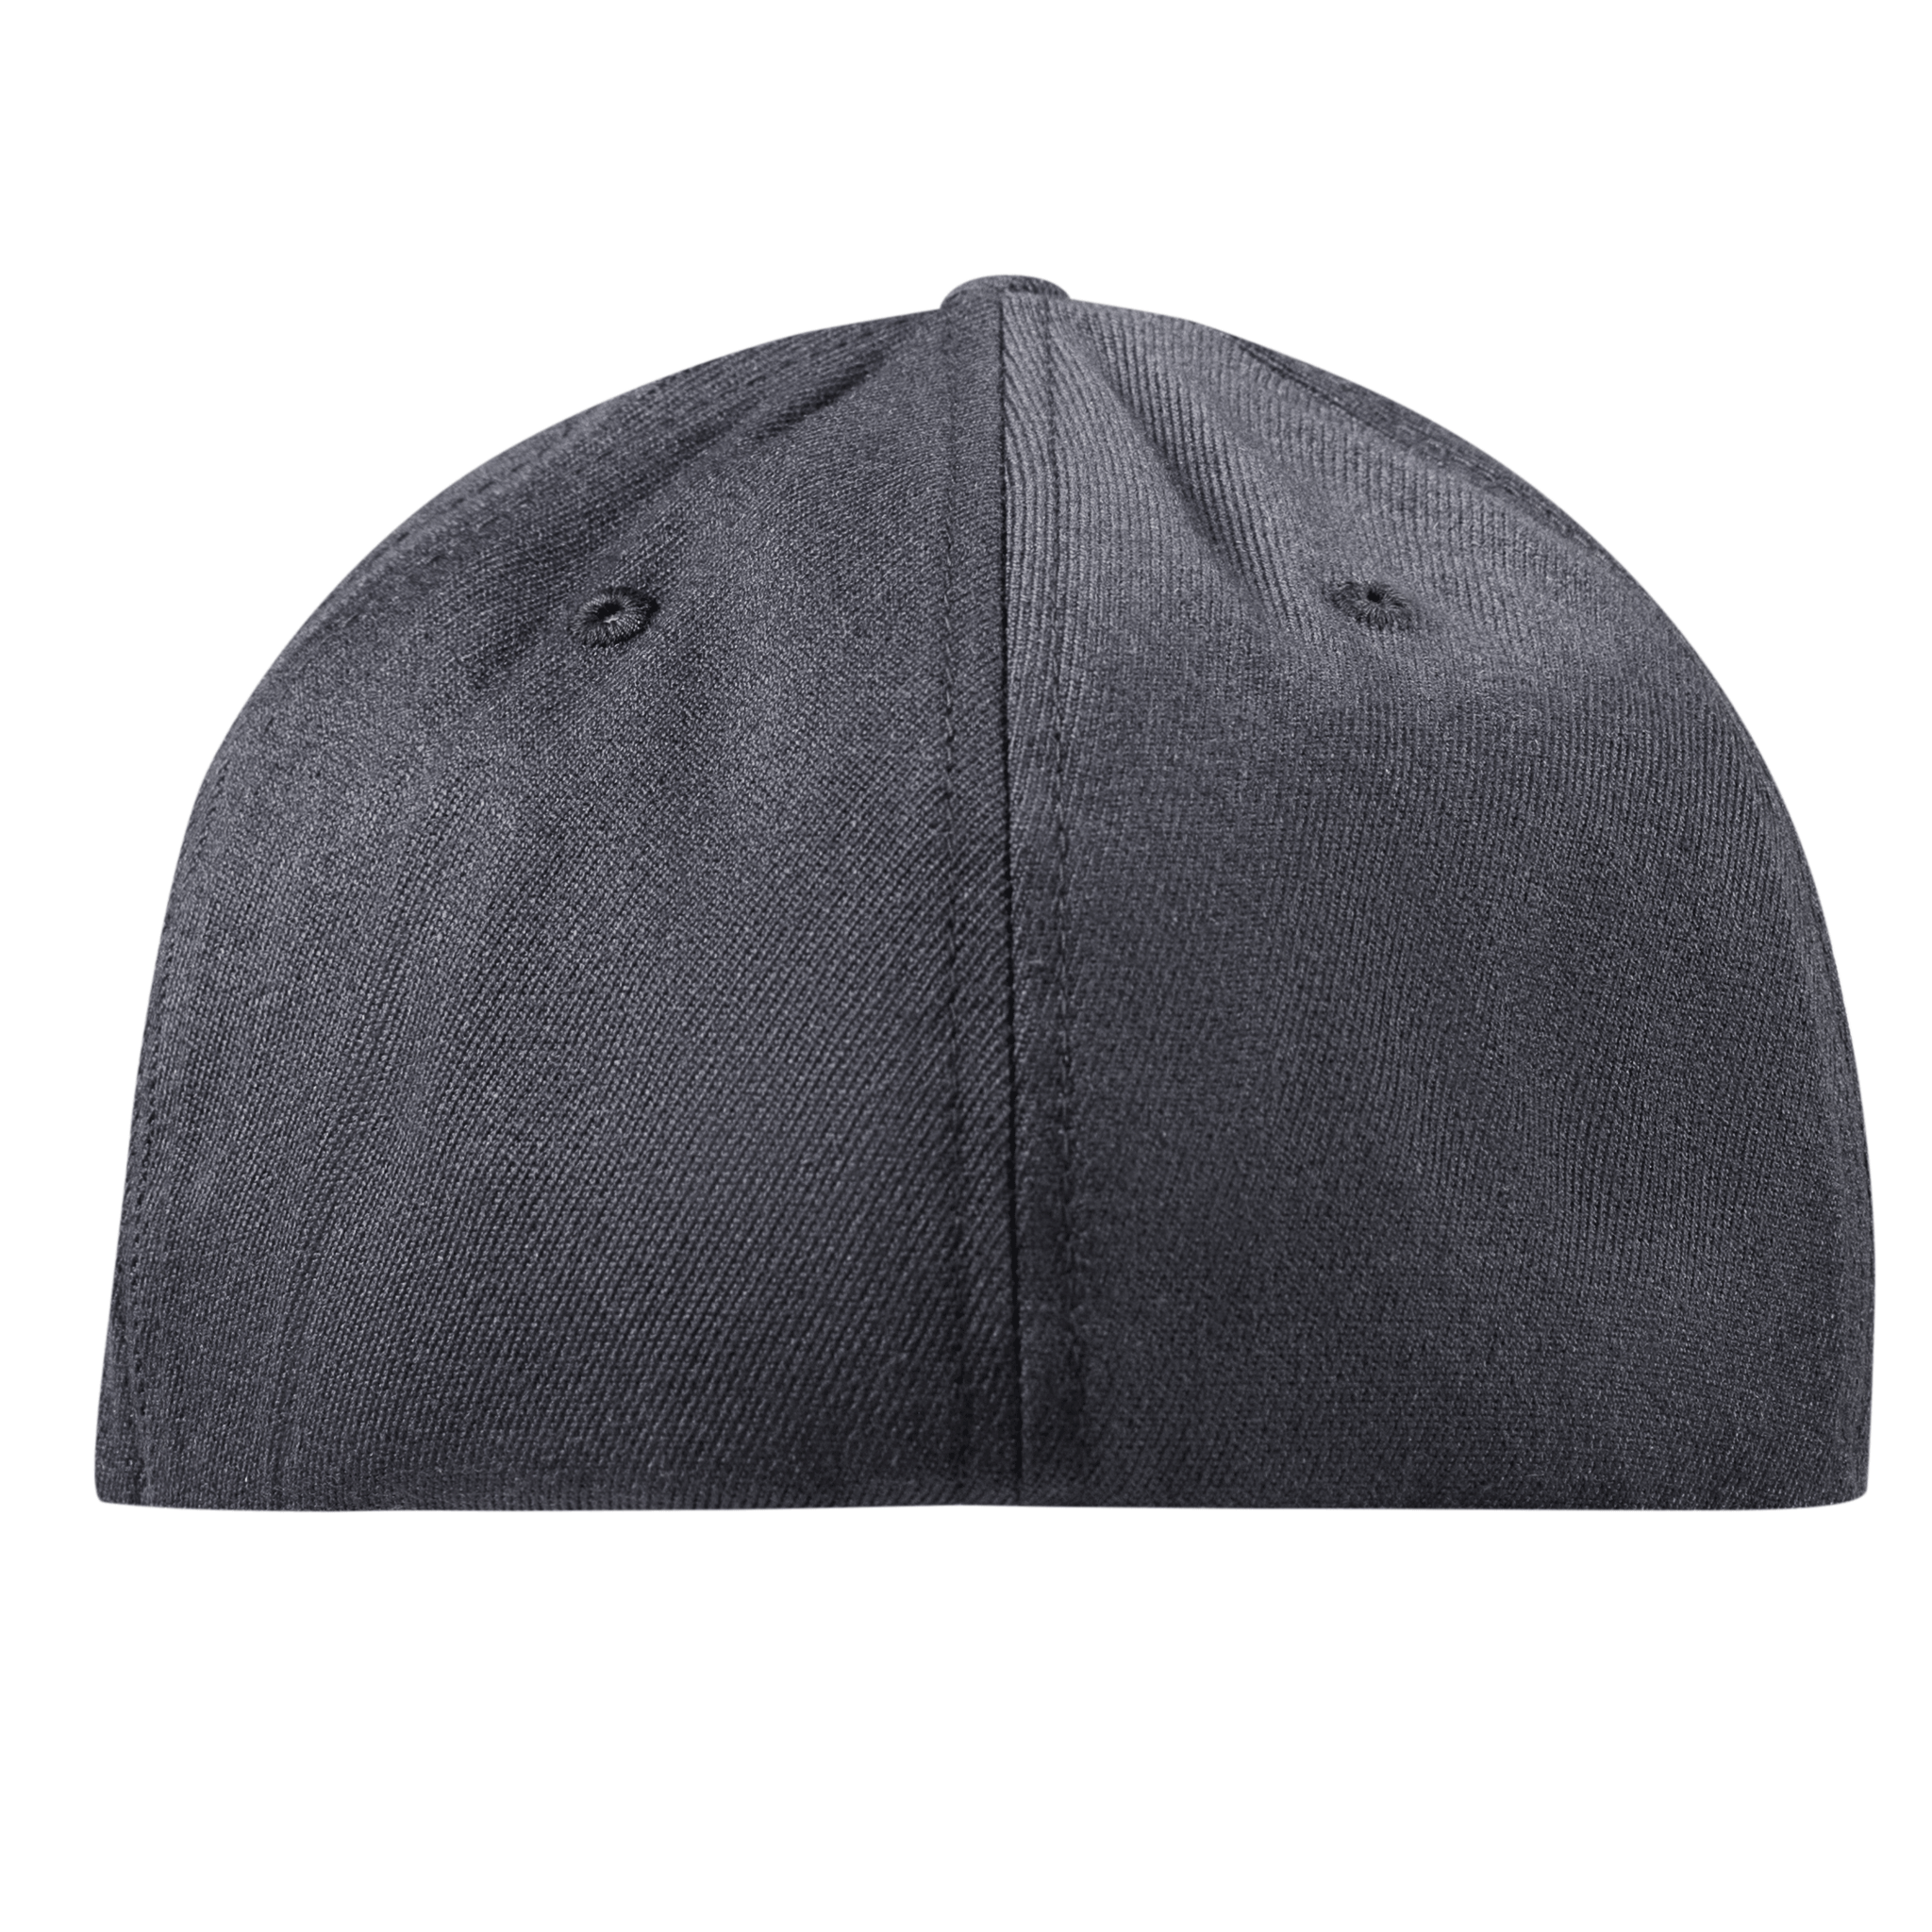 Ohio Camo Flexfit Fitted Back Charcoal